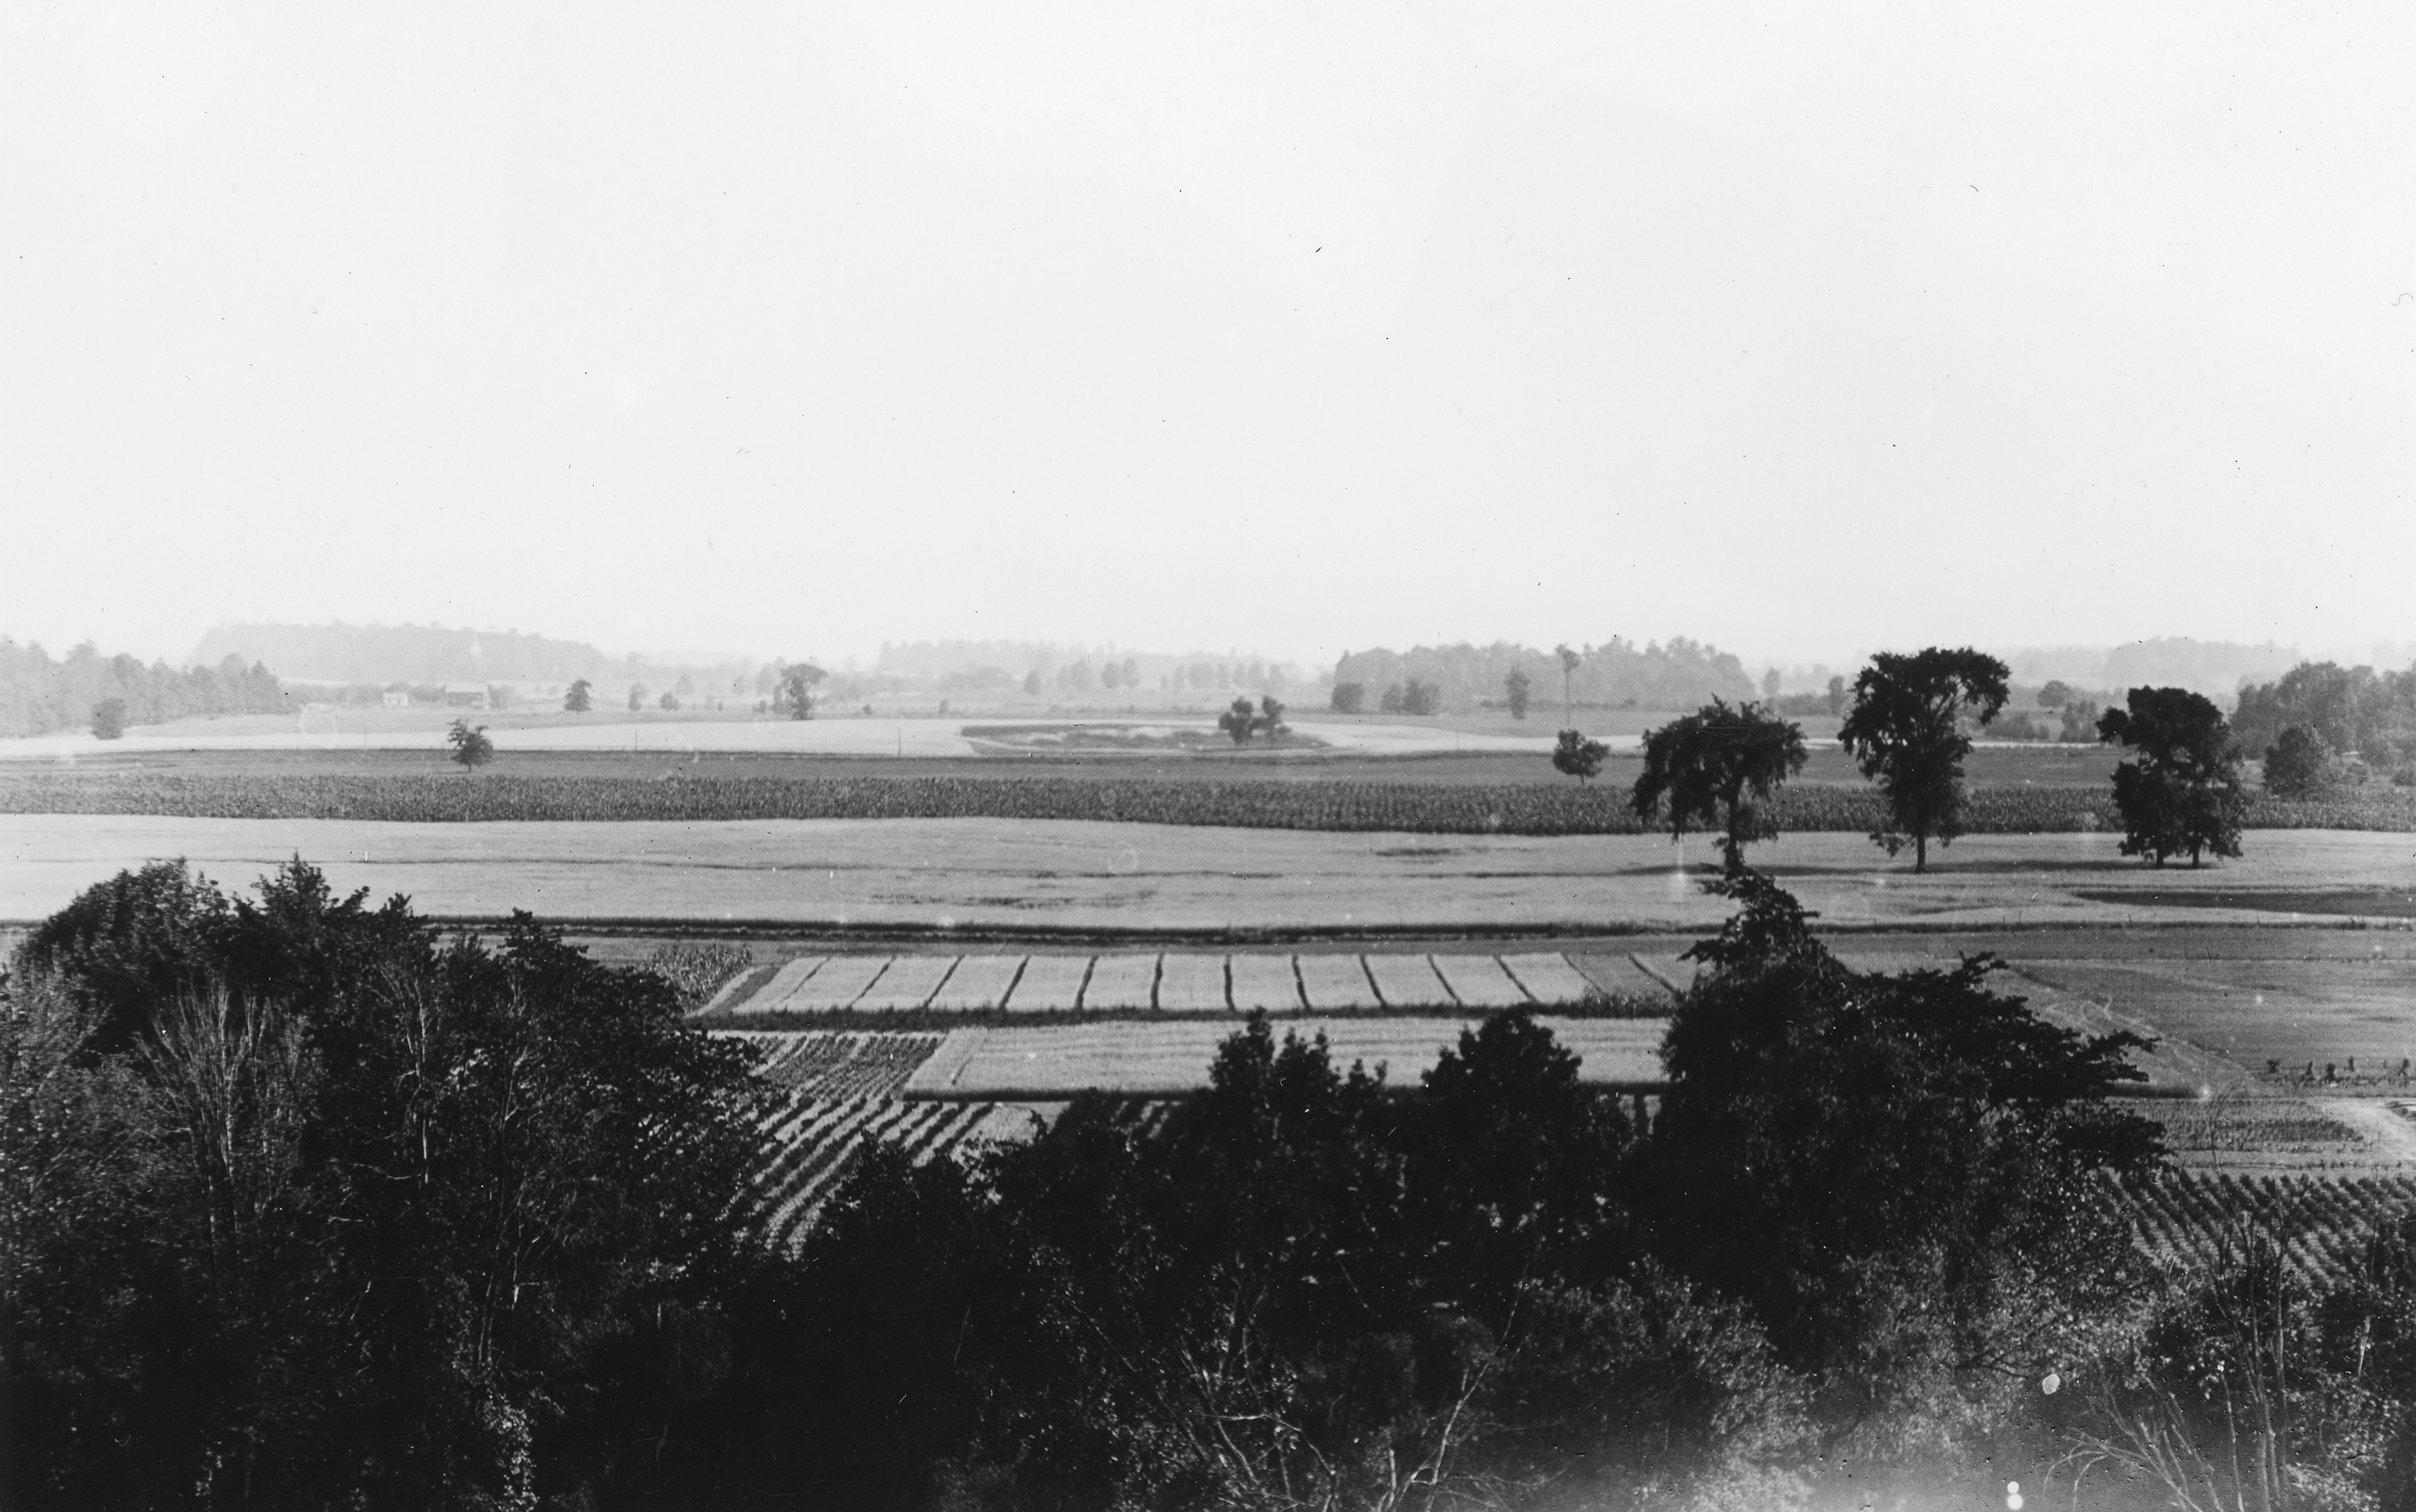 Campus Forestry Plats, undated